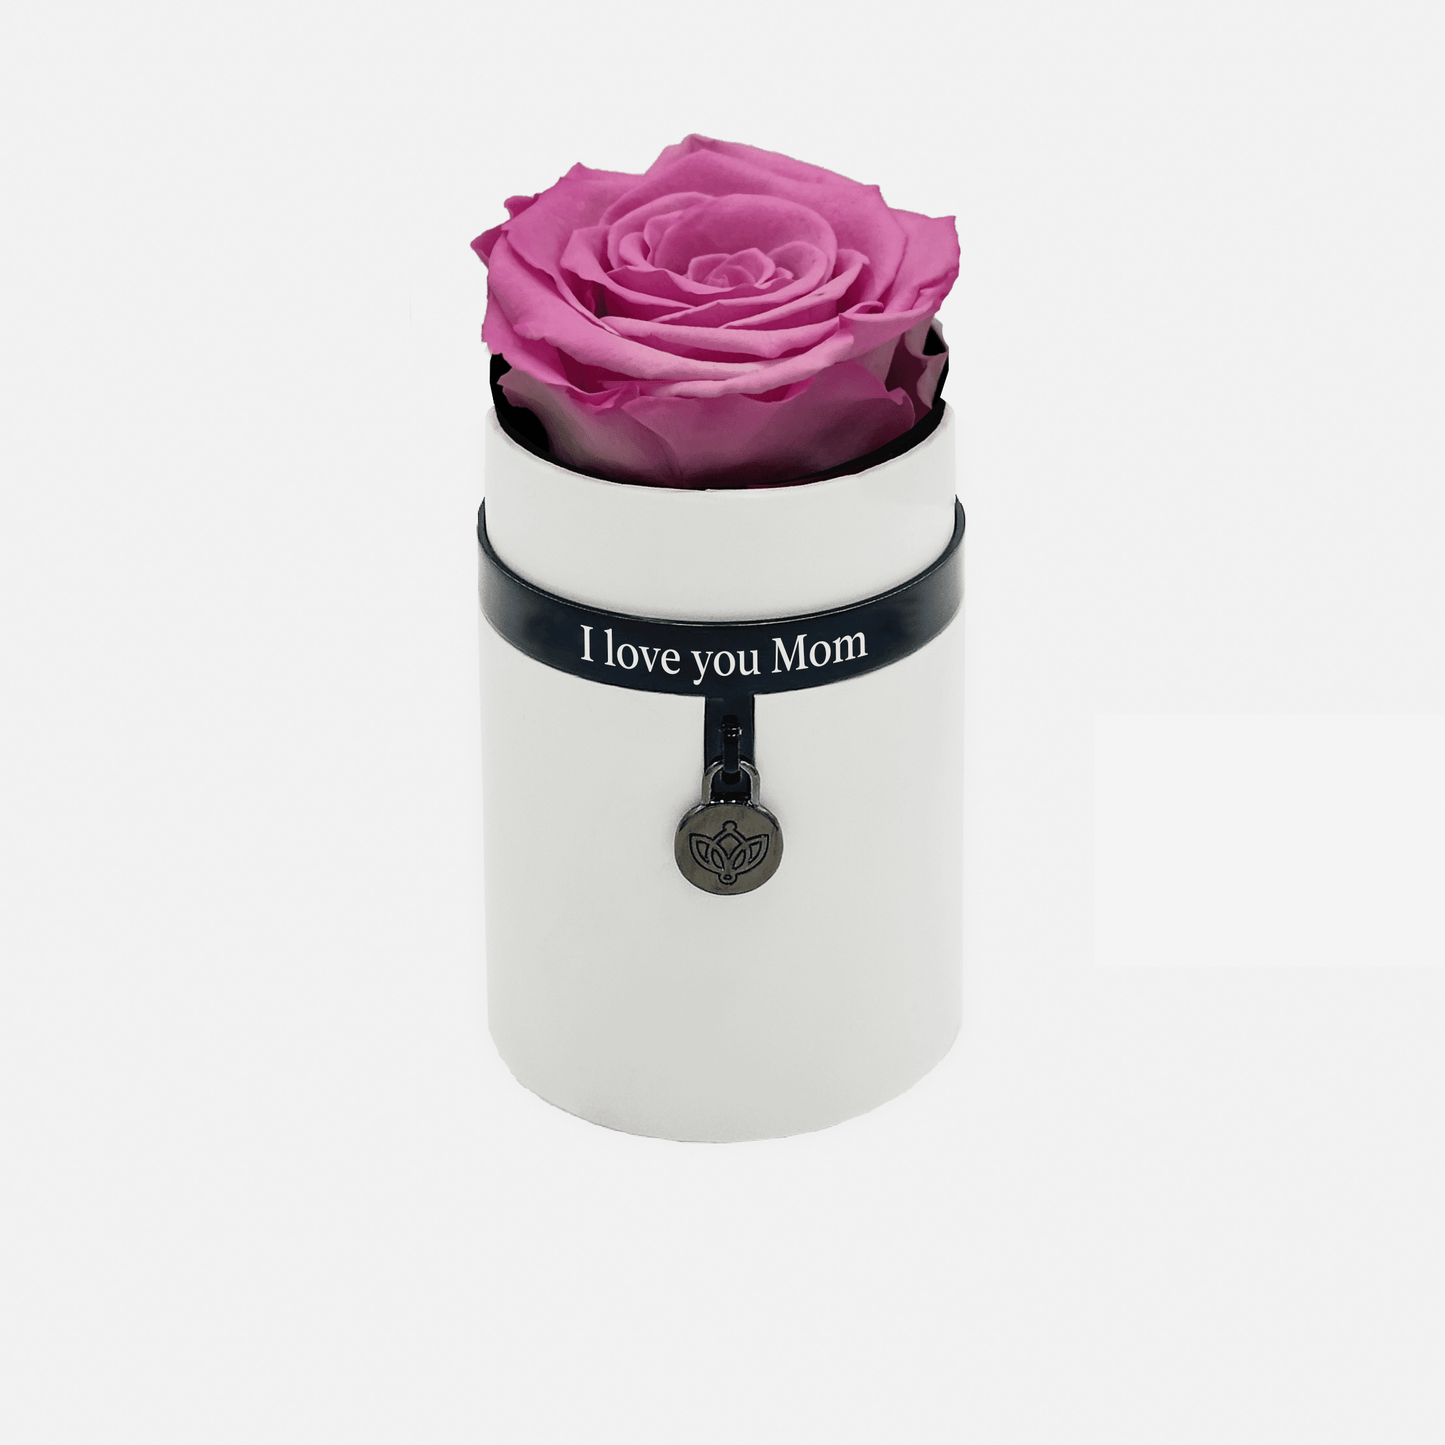 One in a Million™ Round White Box | I love you Mom | Candy Pink Rose